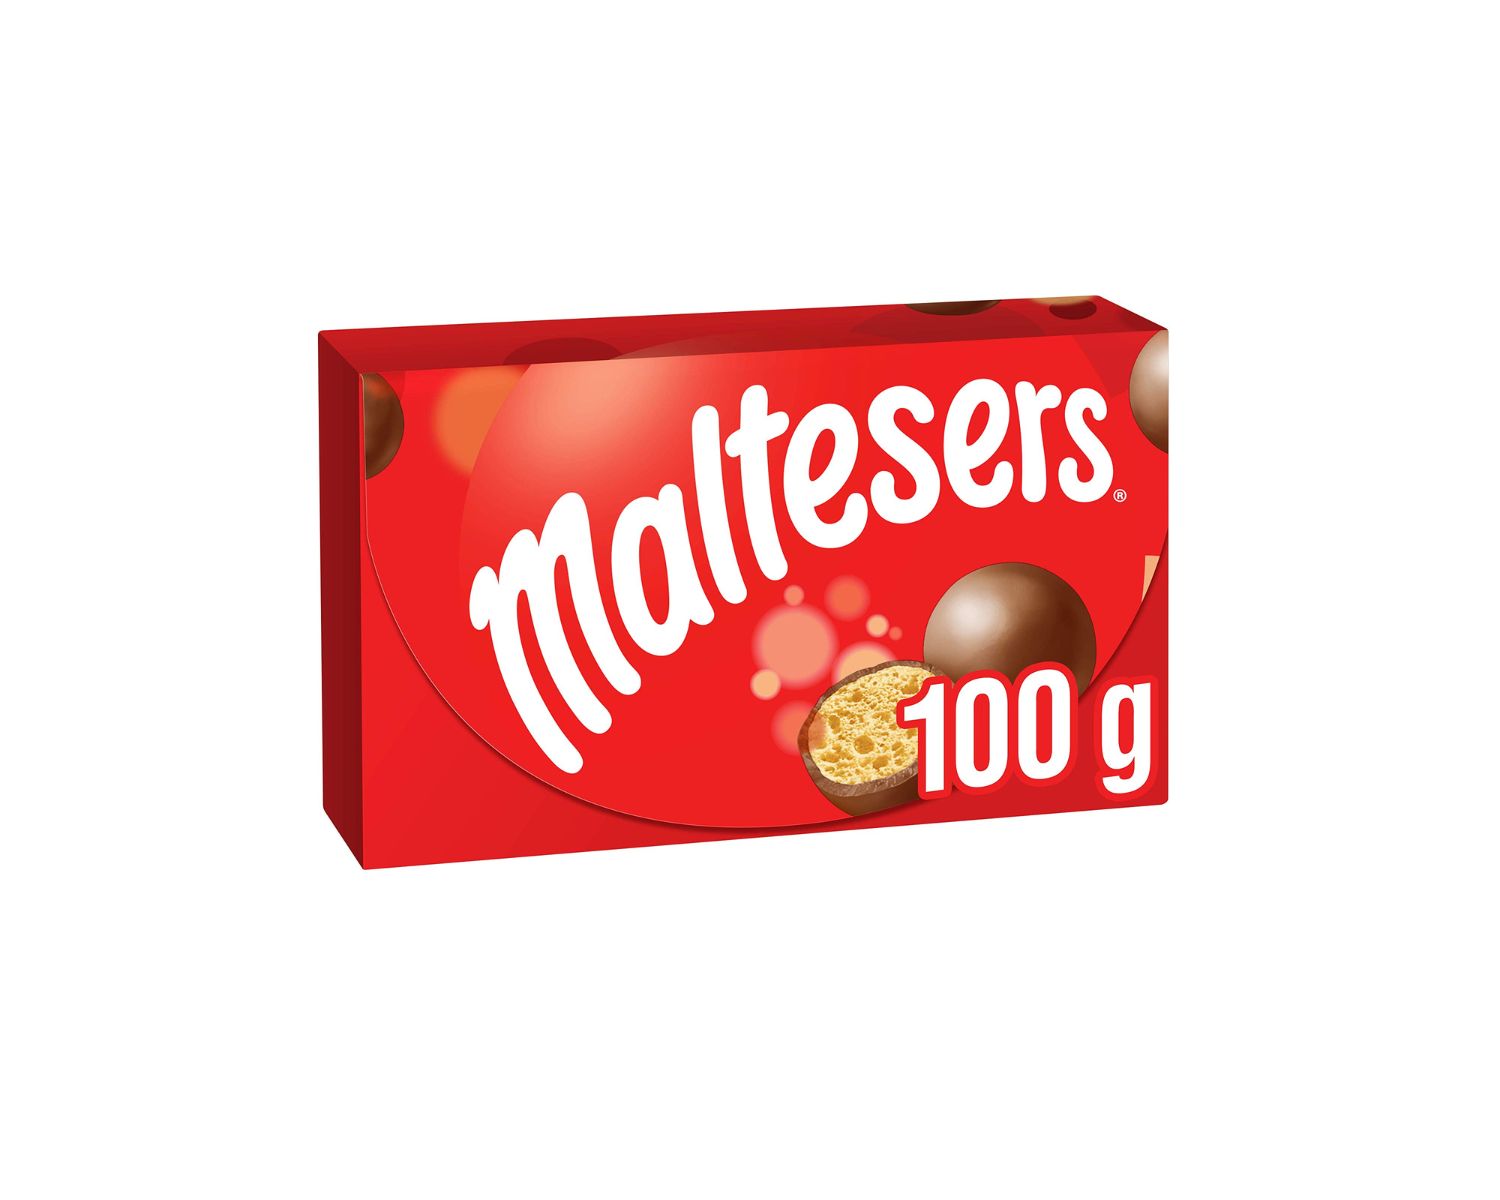 15-intriguing-facts-about-maltesers